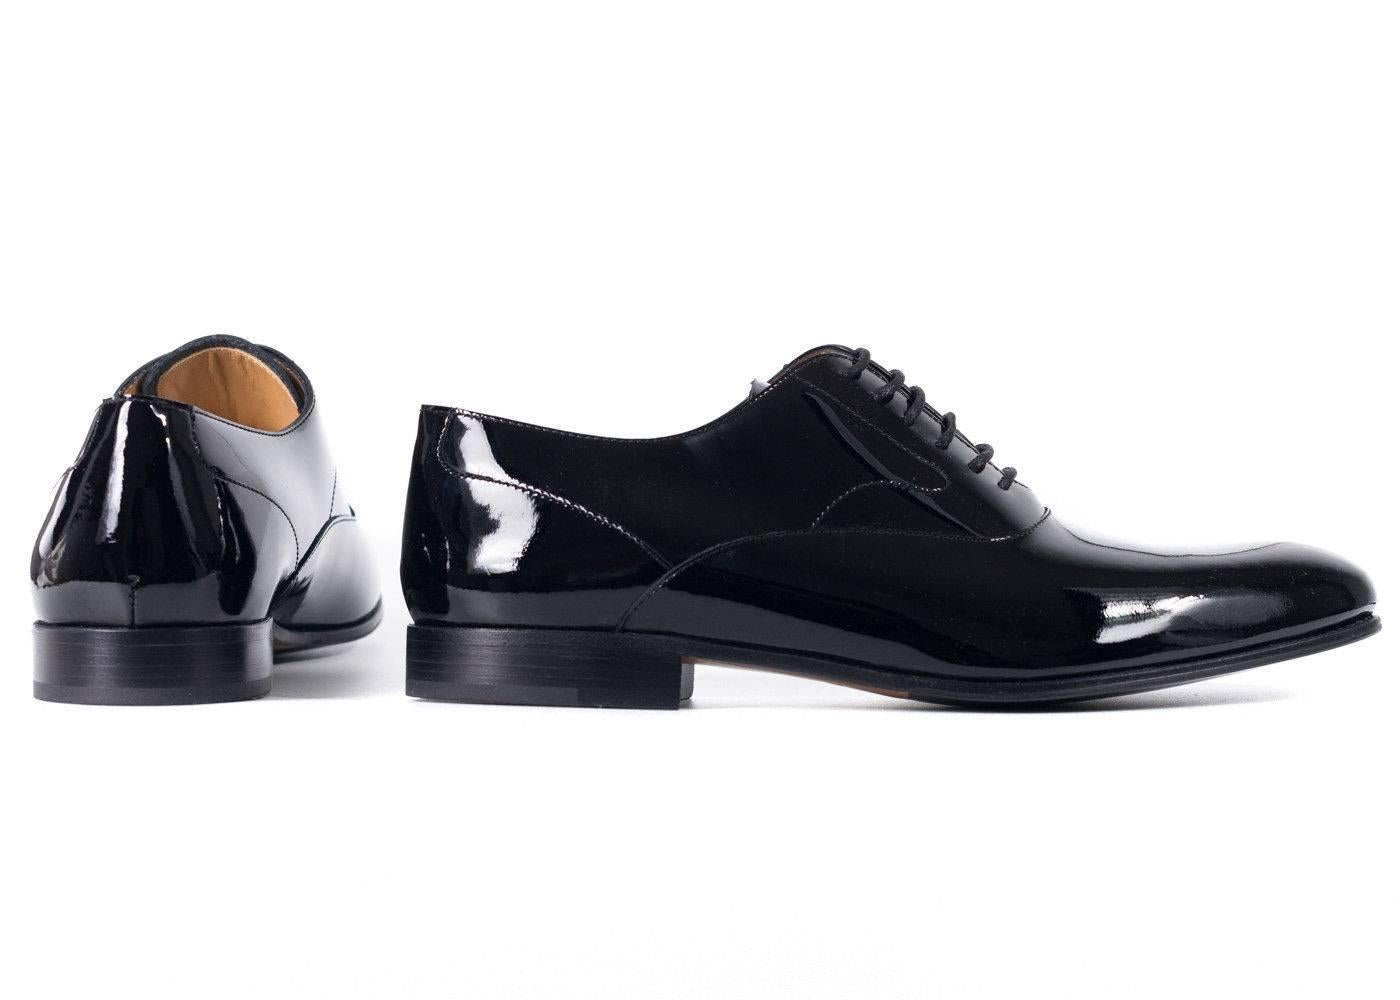 The Valentino Patent Leather Oxfords are ideal for that special event. Whip these out and pair them with that all black Tuxedo outfit. These high shine oxfords have a functional lace up feature and are perfect for standing out with refinement.

